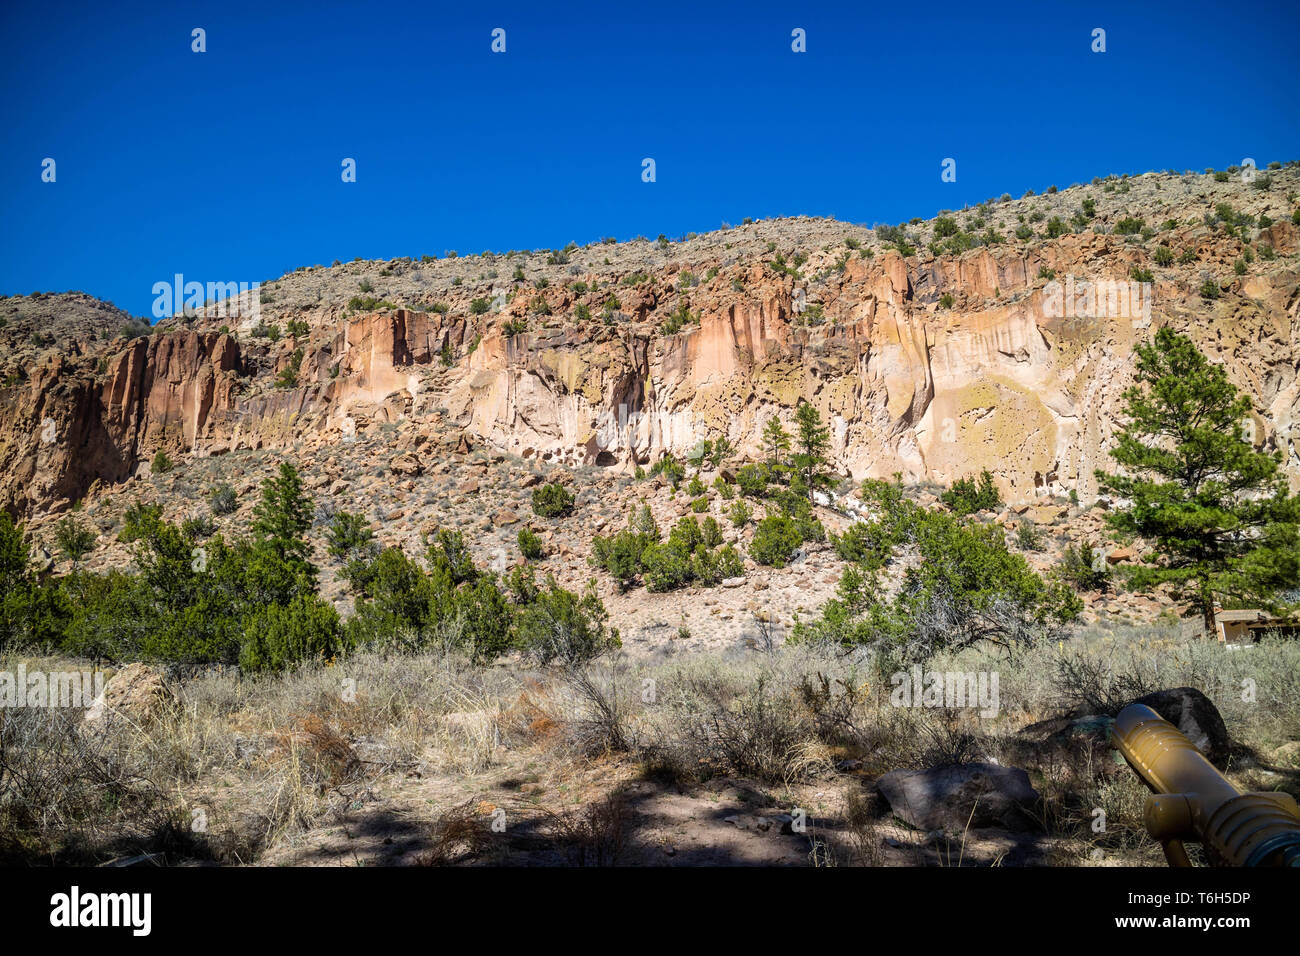 Die Canyons im Bandelier National Monument, New Mexico Stockfoto